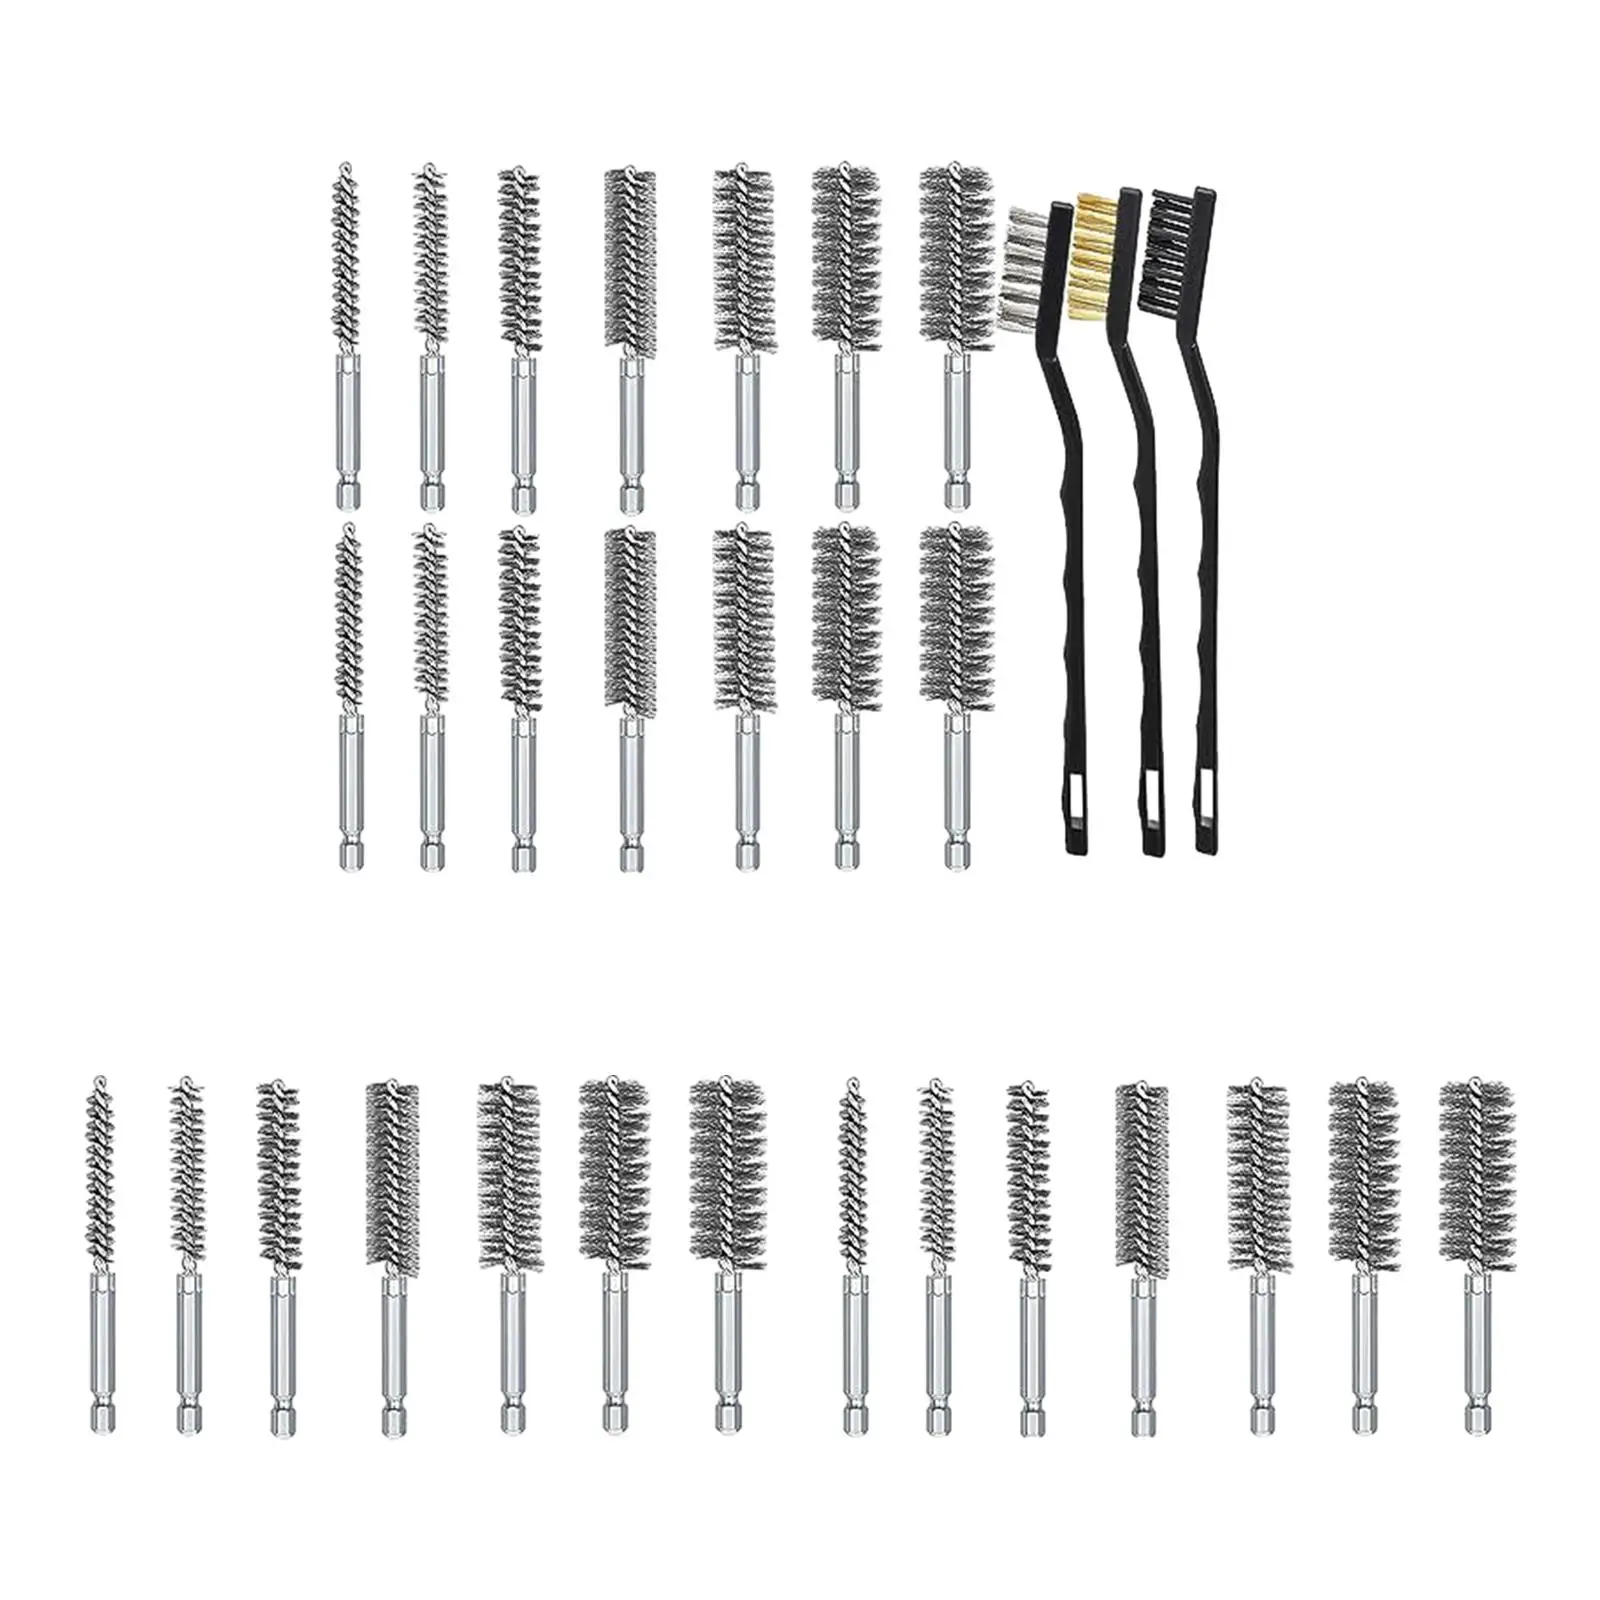 Bore Brush Set Sturdy Accessories Durable Professional 1/4 inch Hex Shank